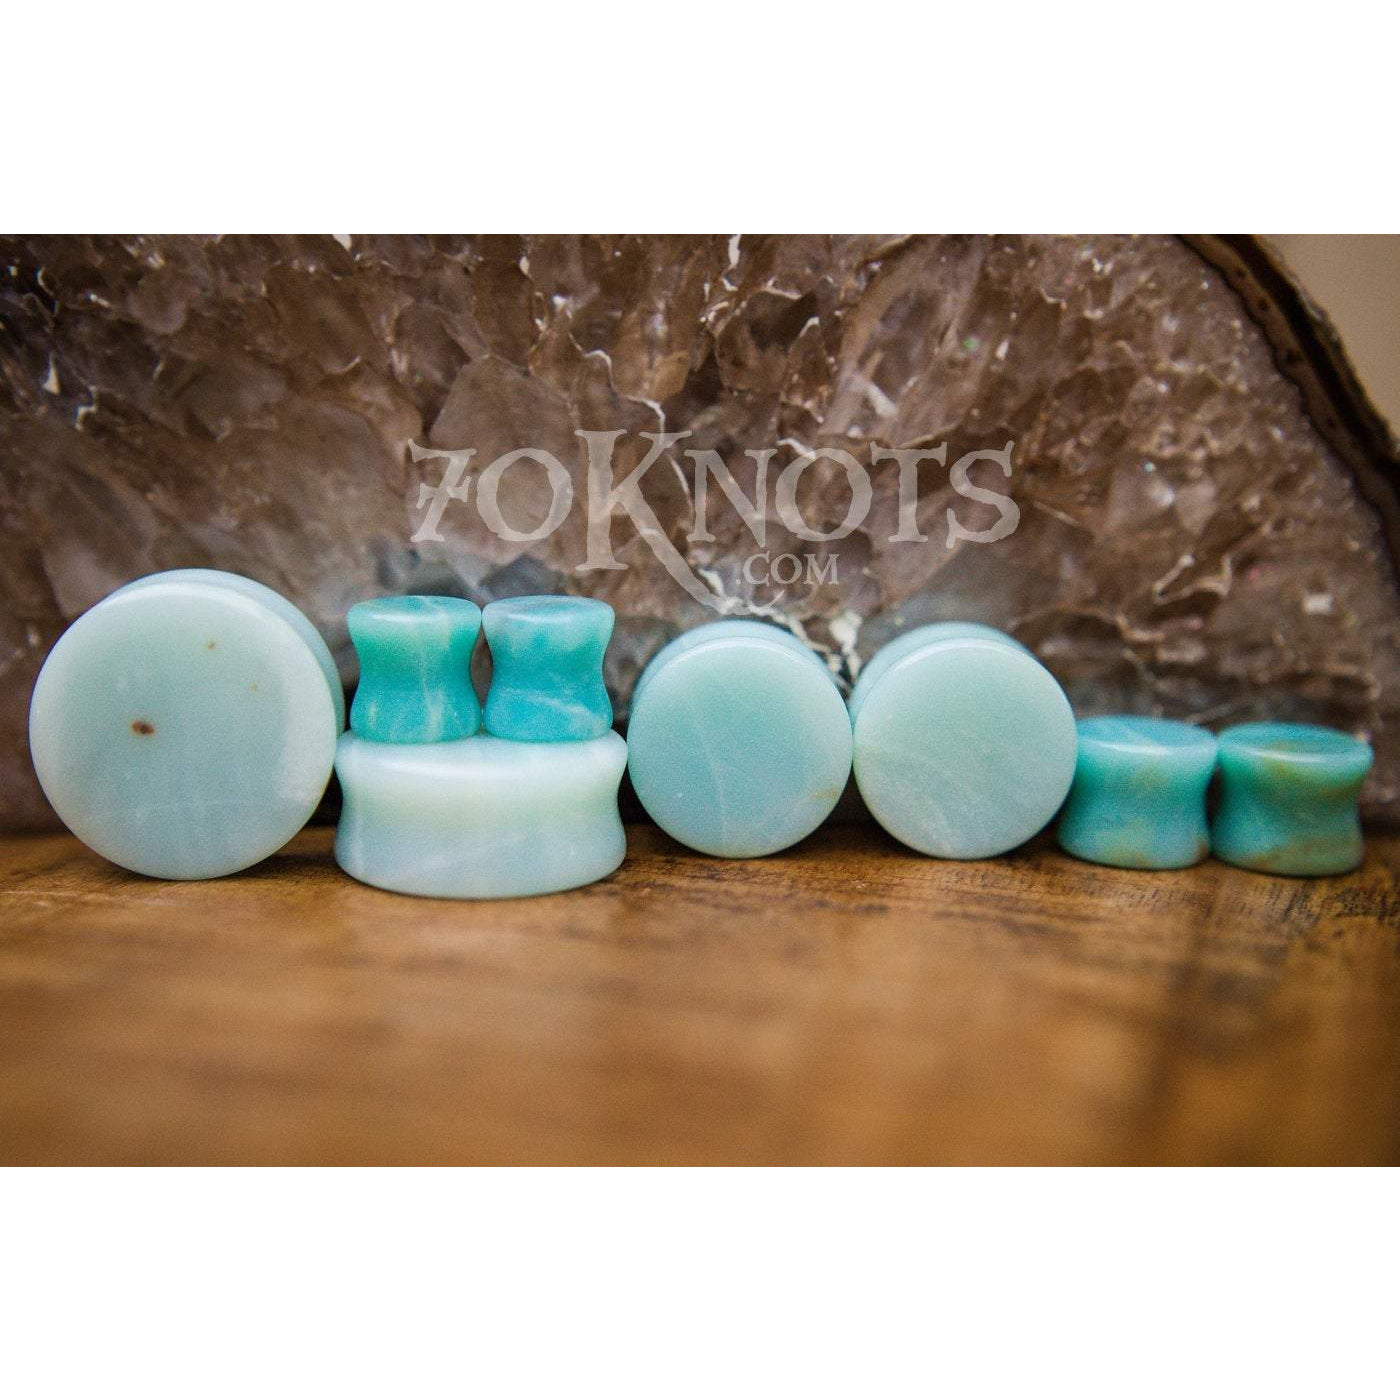 Amazonite Double Flared Plugs, Pair - 70 Knots